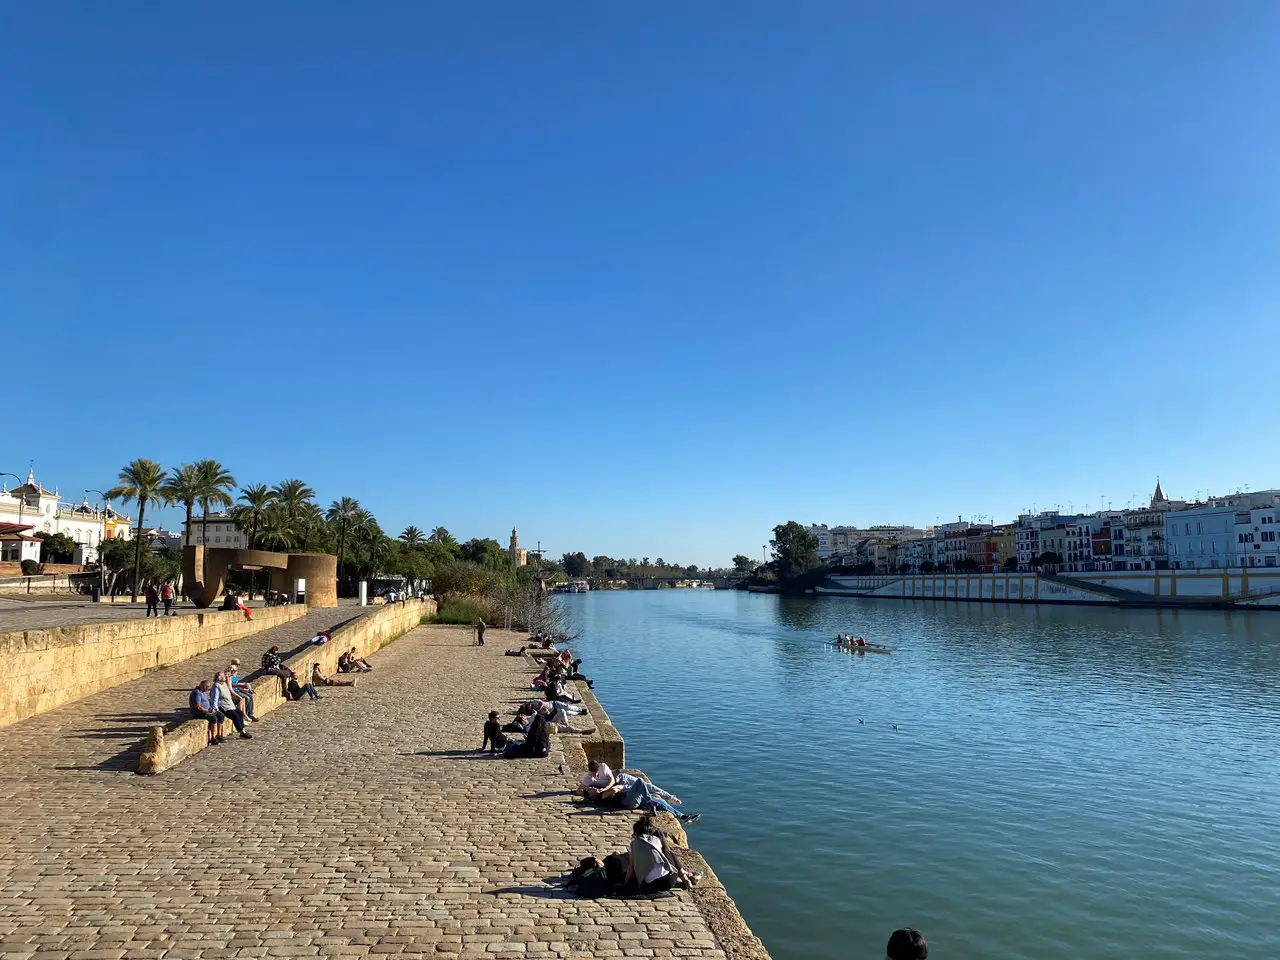 The banks of the Guadalquivir on a sunny day.